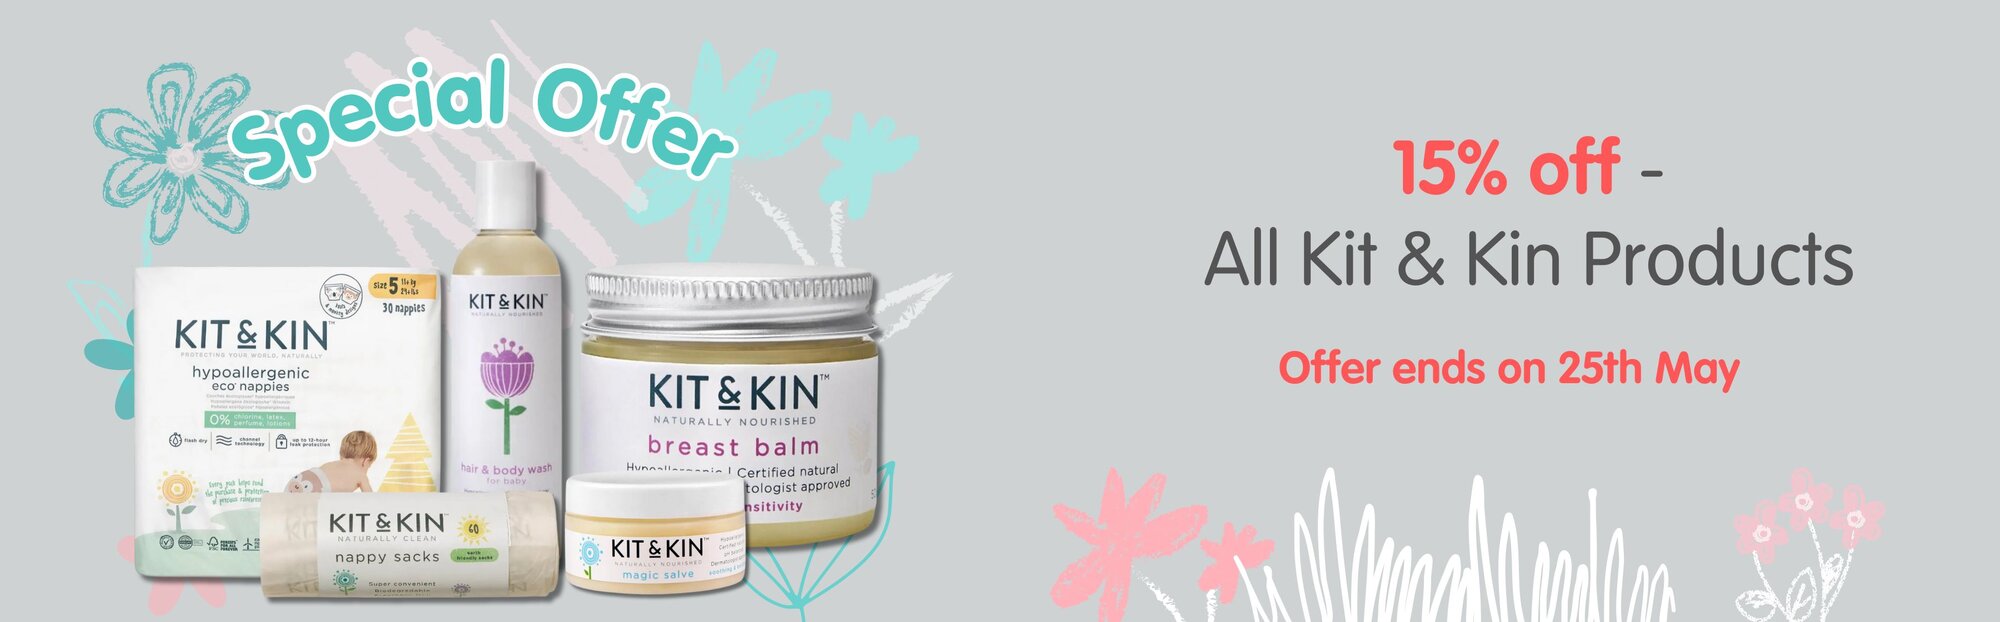 Kit & Kin - 15% off on your order of any 3 Kit & Kin Products